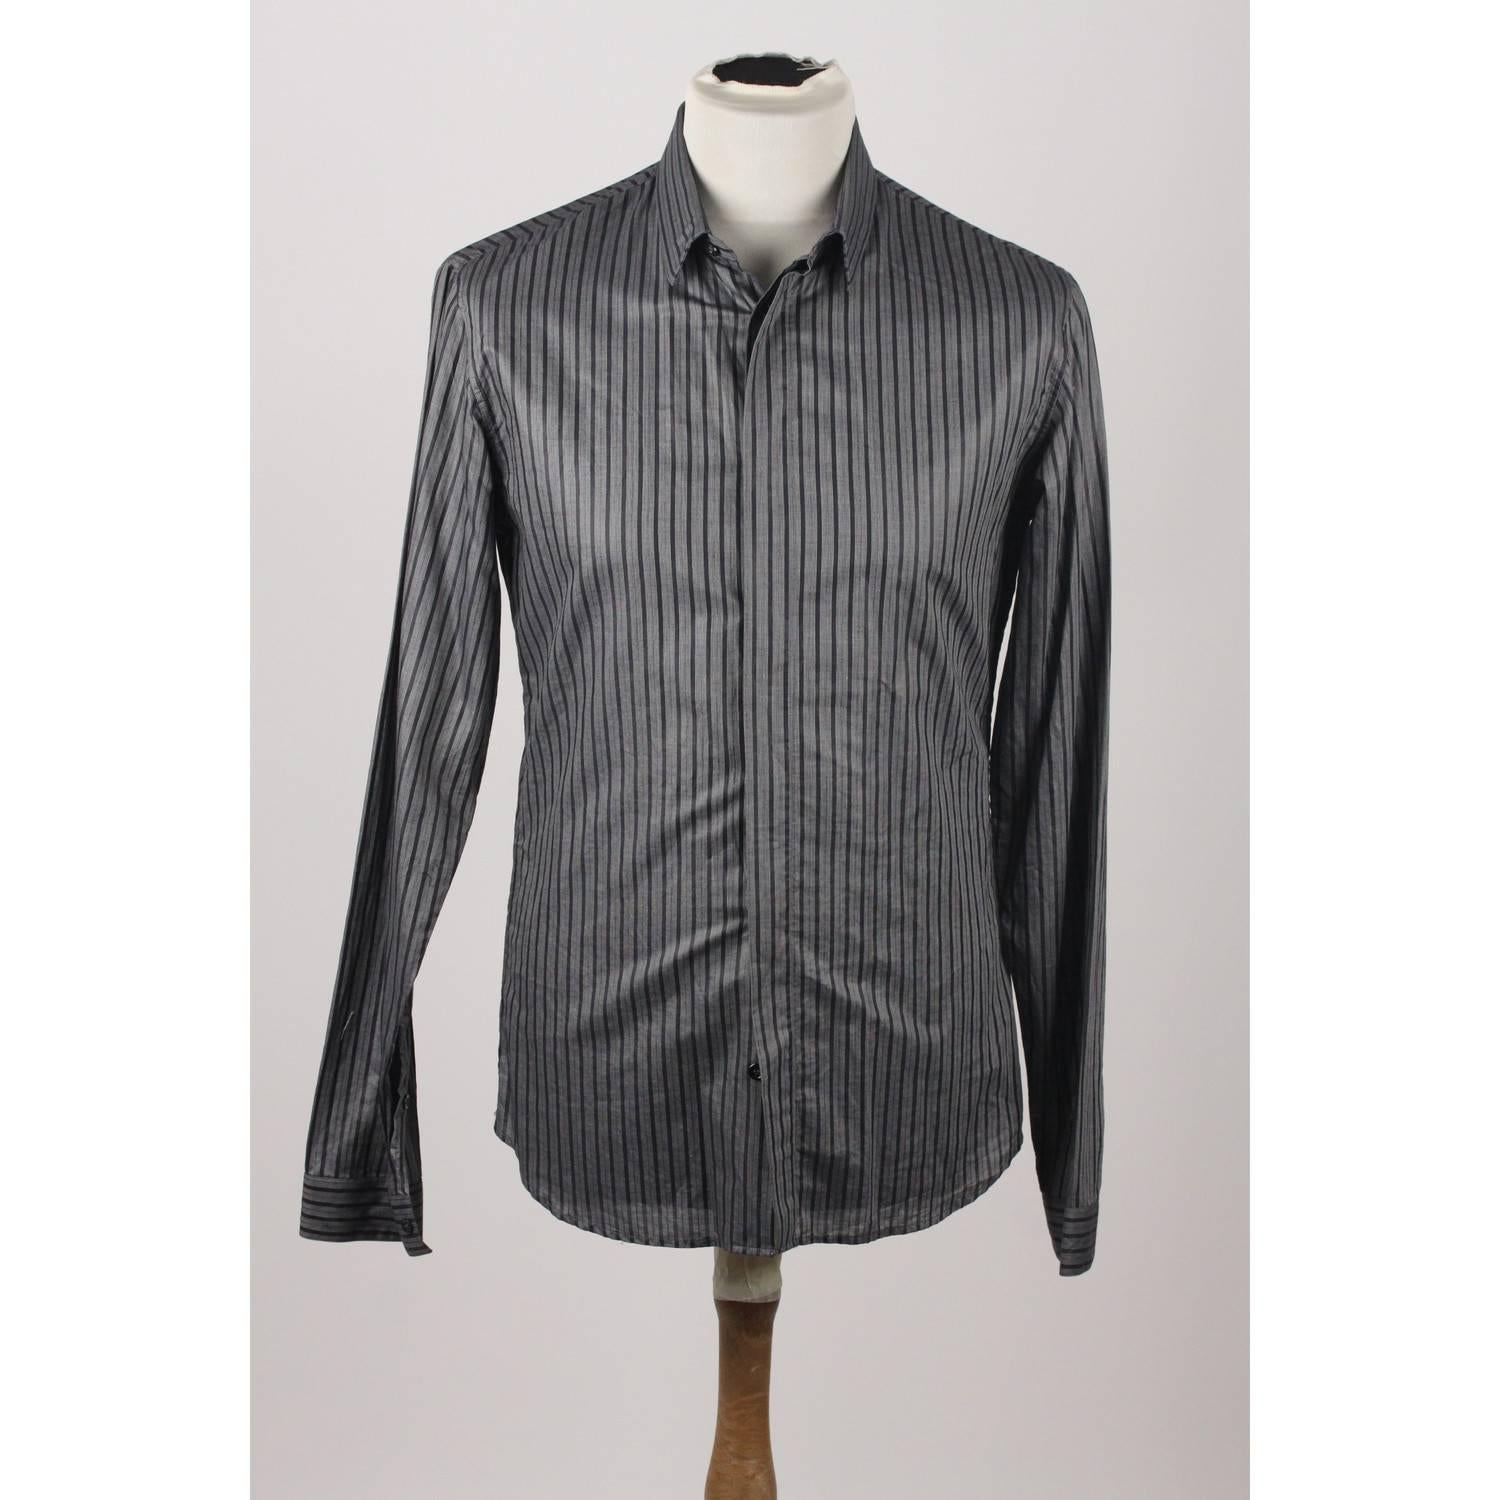 - DIOR HOMME men shirt
- Gray Striped 
- 100% Cotton
- Size: 39 (The size shown for this item is the size indicated by the designer on the label)It should correspond to a MEDIUM